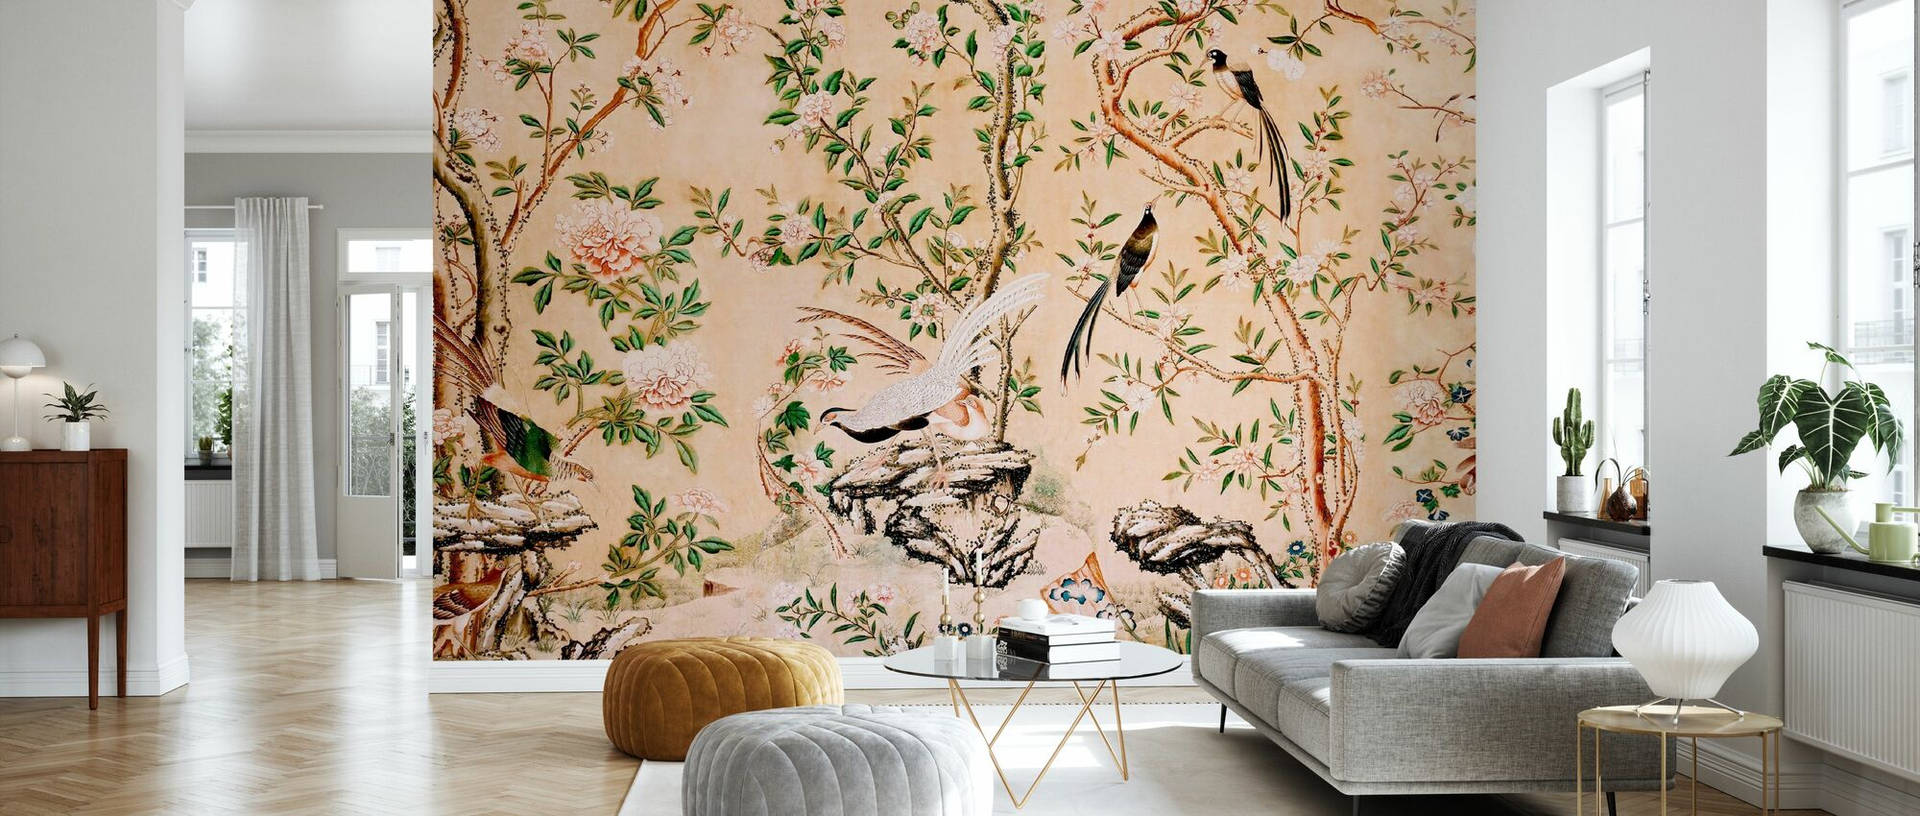 Chinoiserie Living Room Background